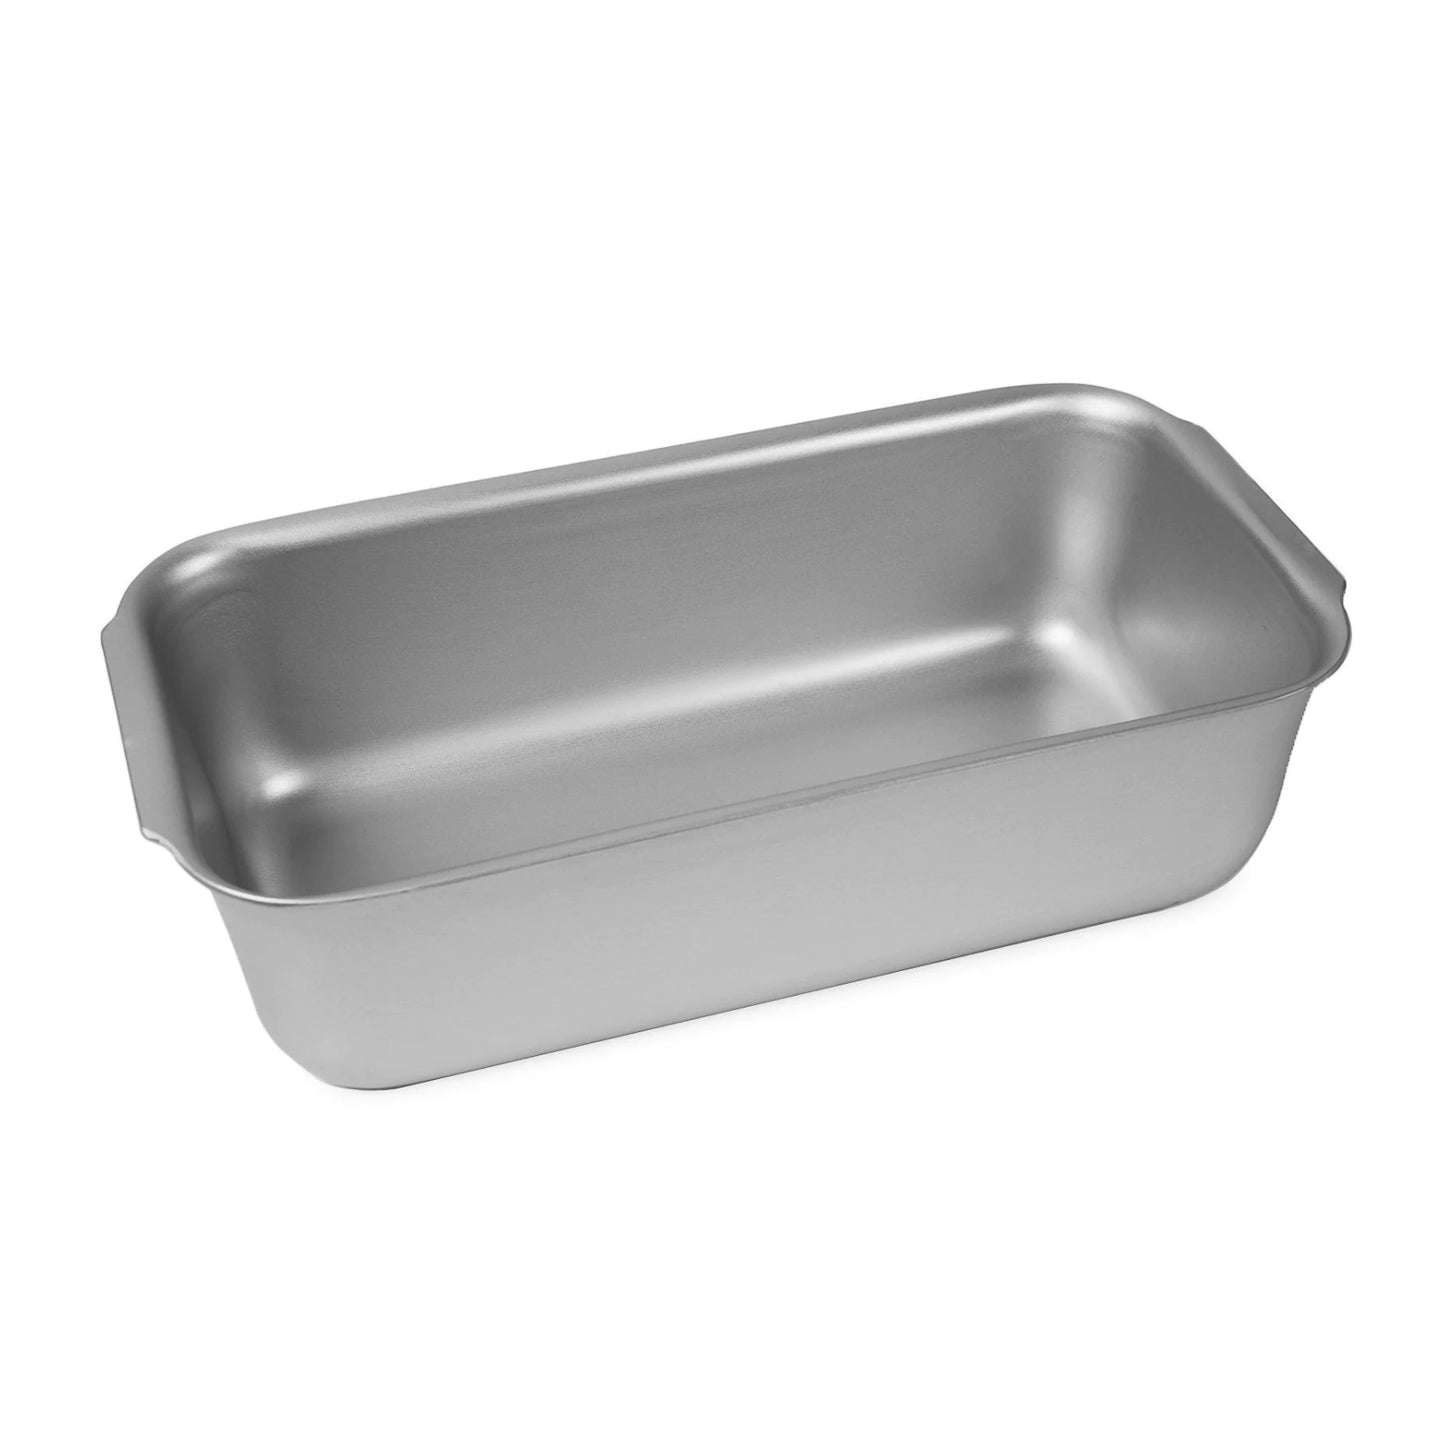 Silverwood Bakeware Loaf Pan with Round Corners